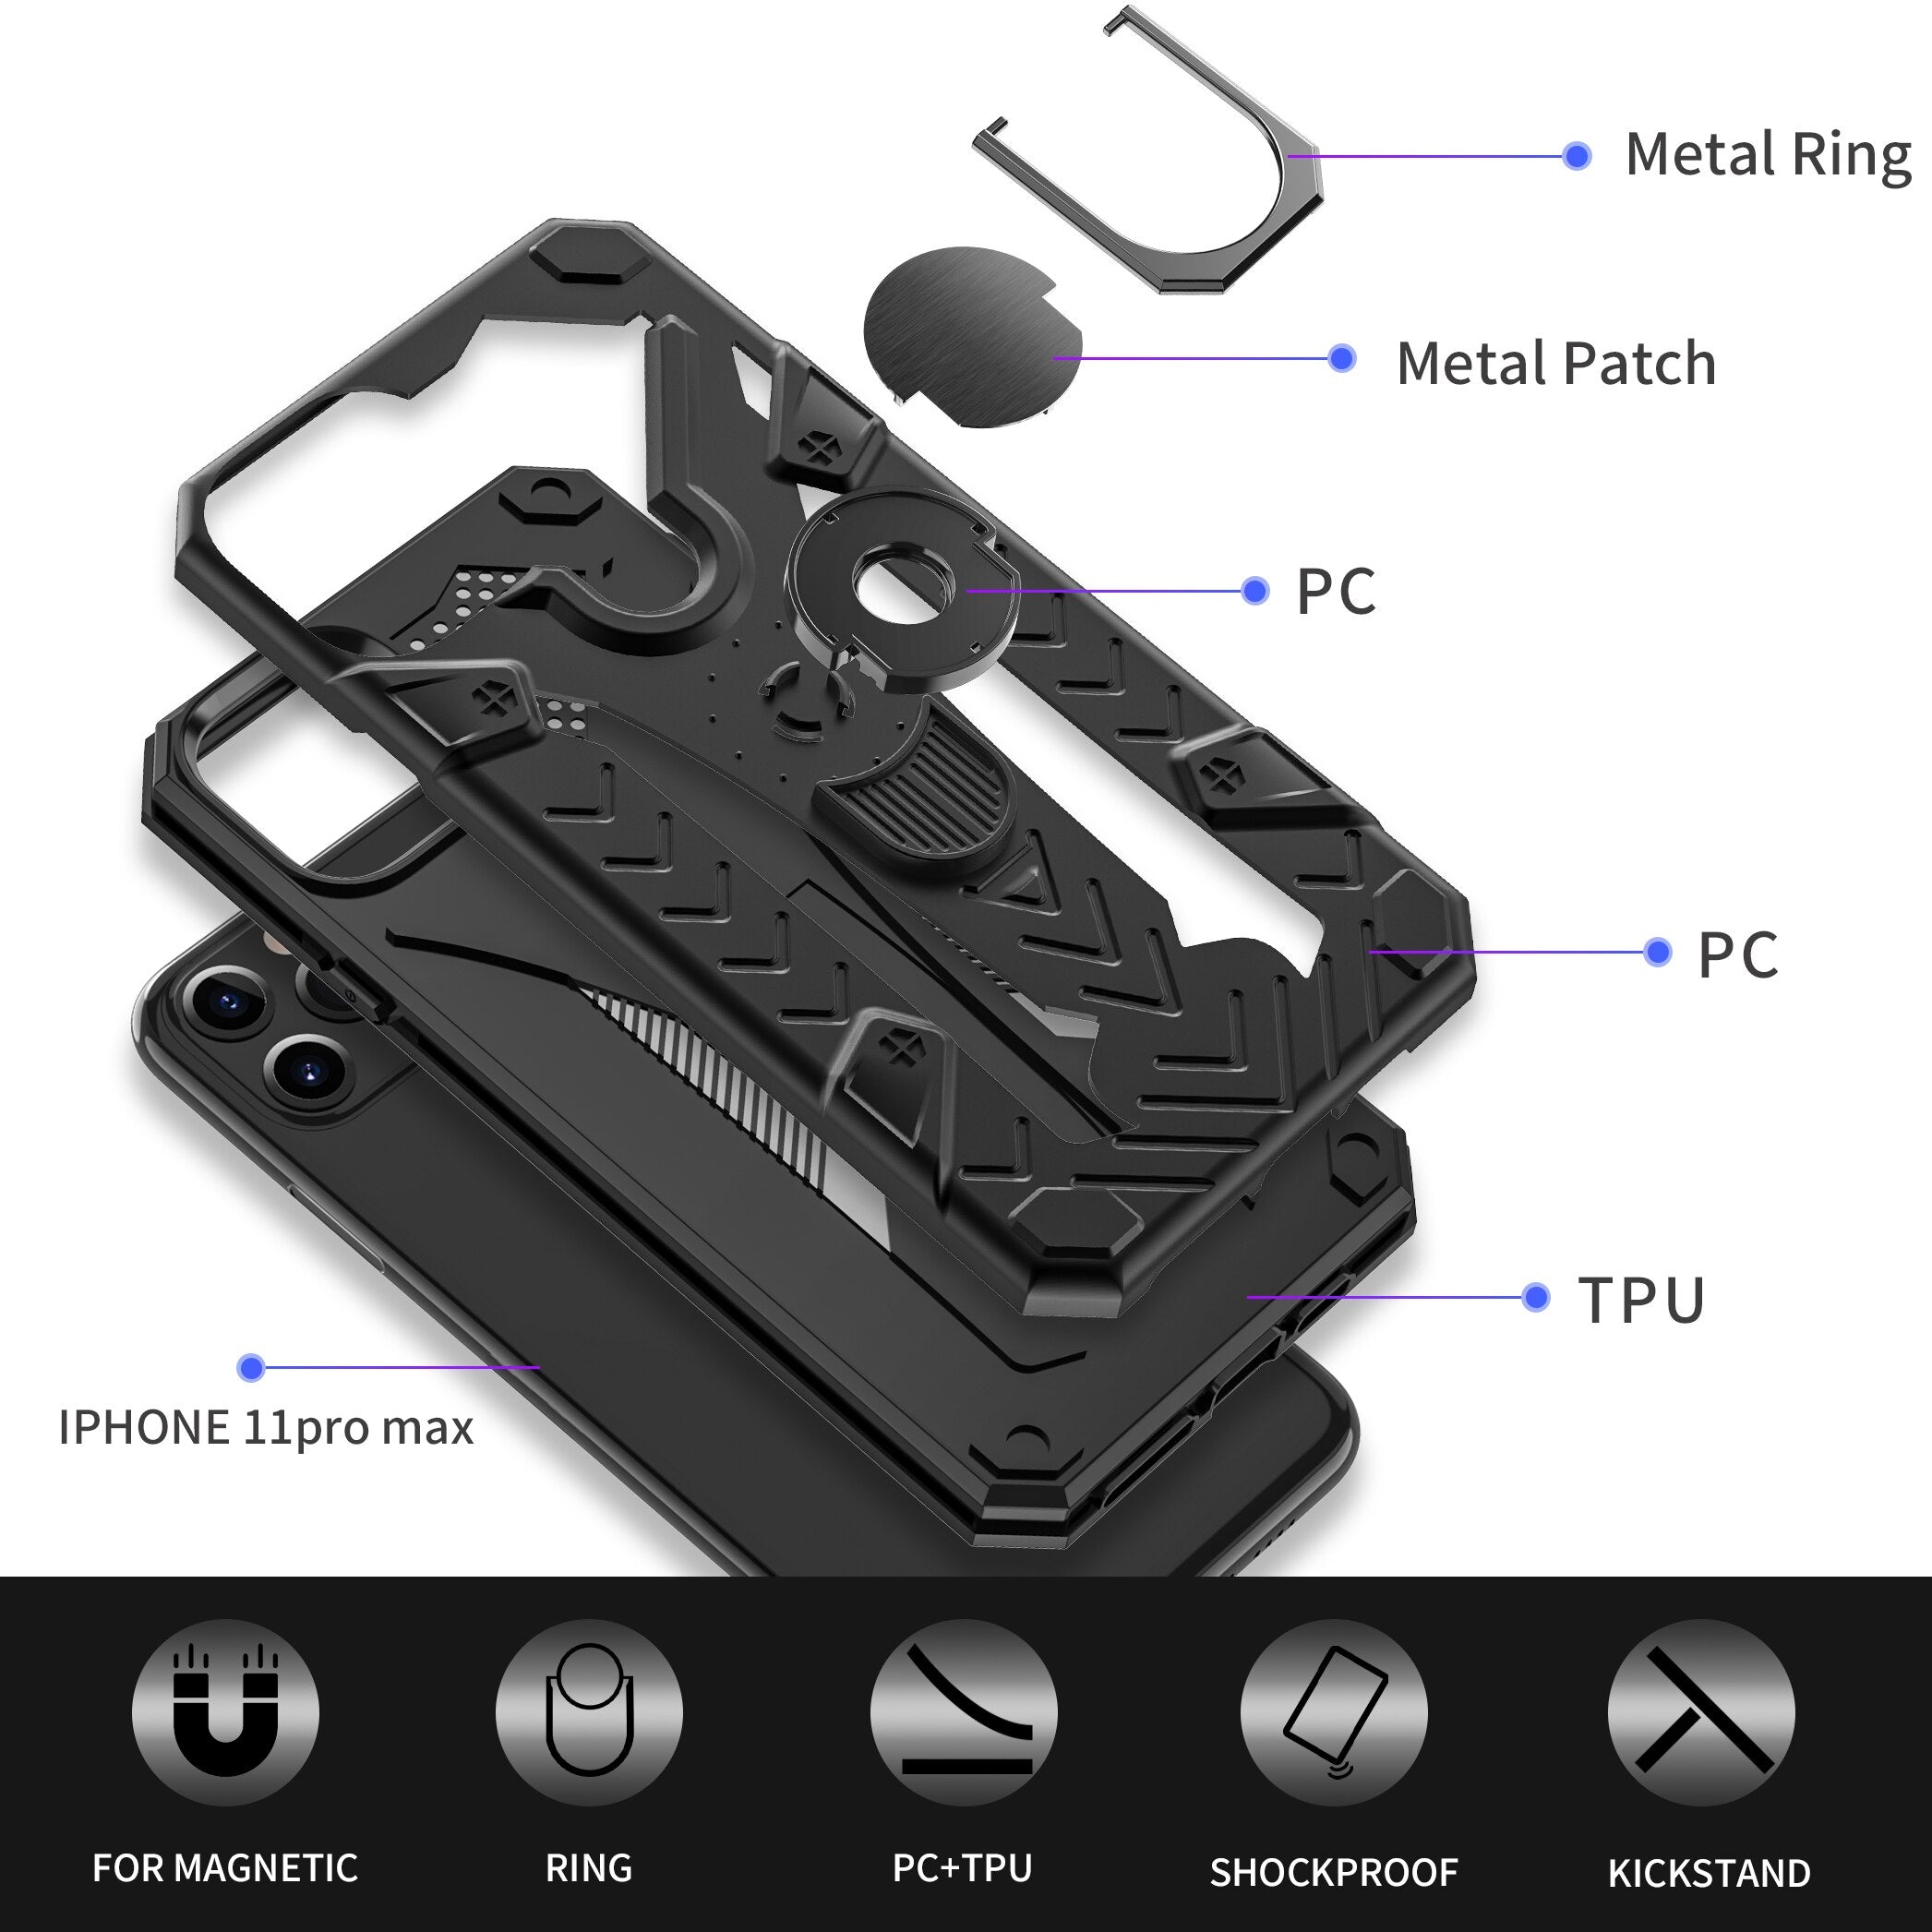 Case Luxury Armor Shockproof Ring Holder Case For iPhone